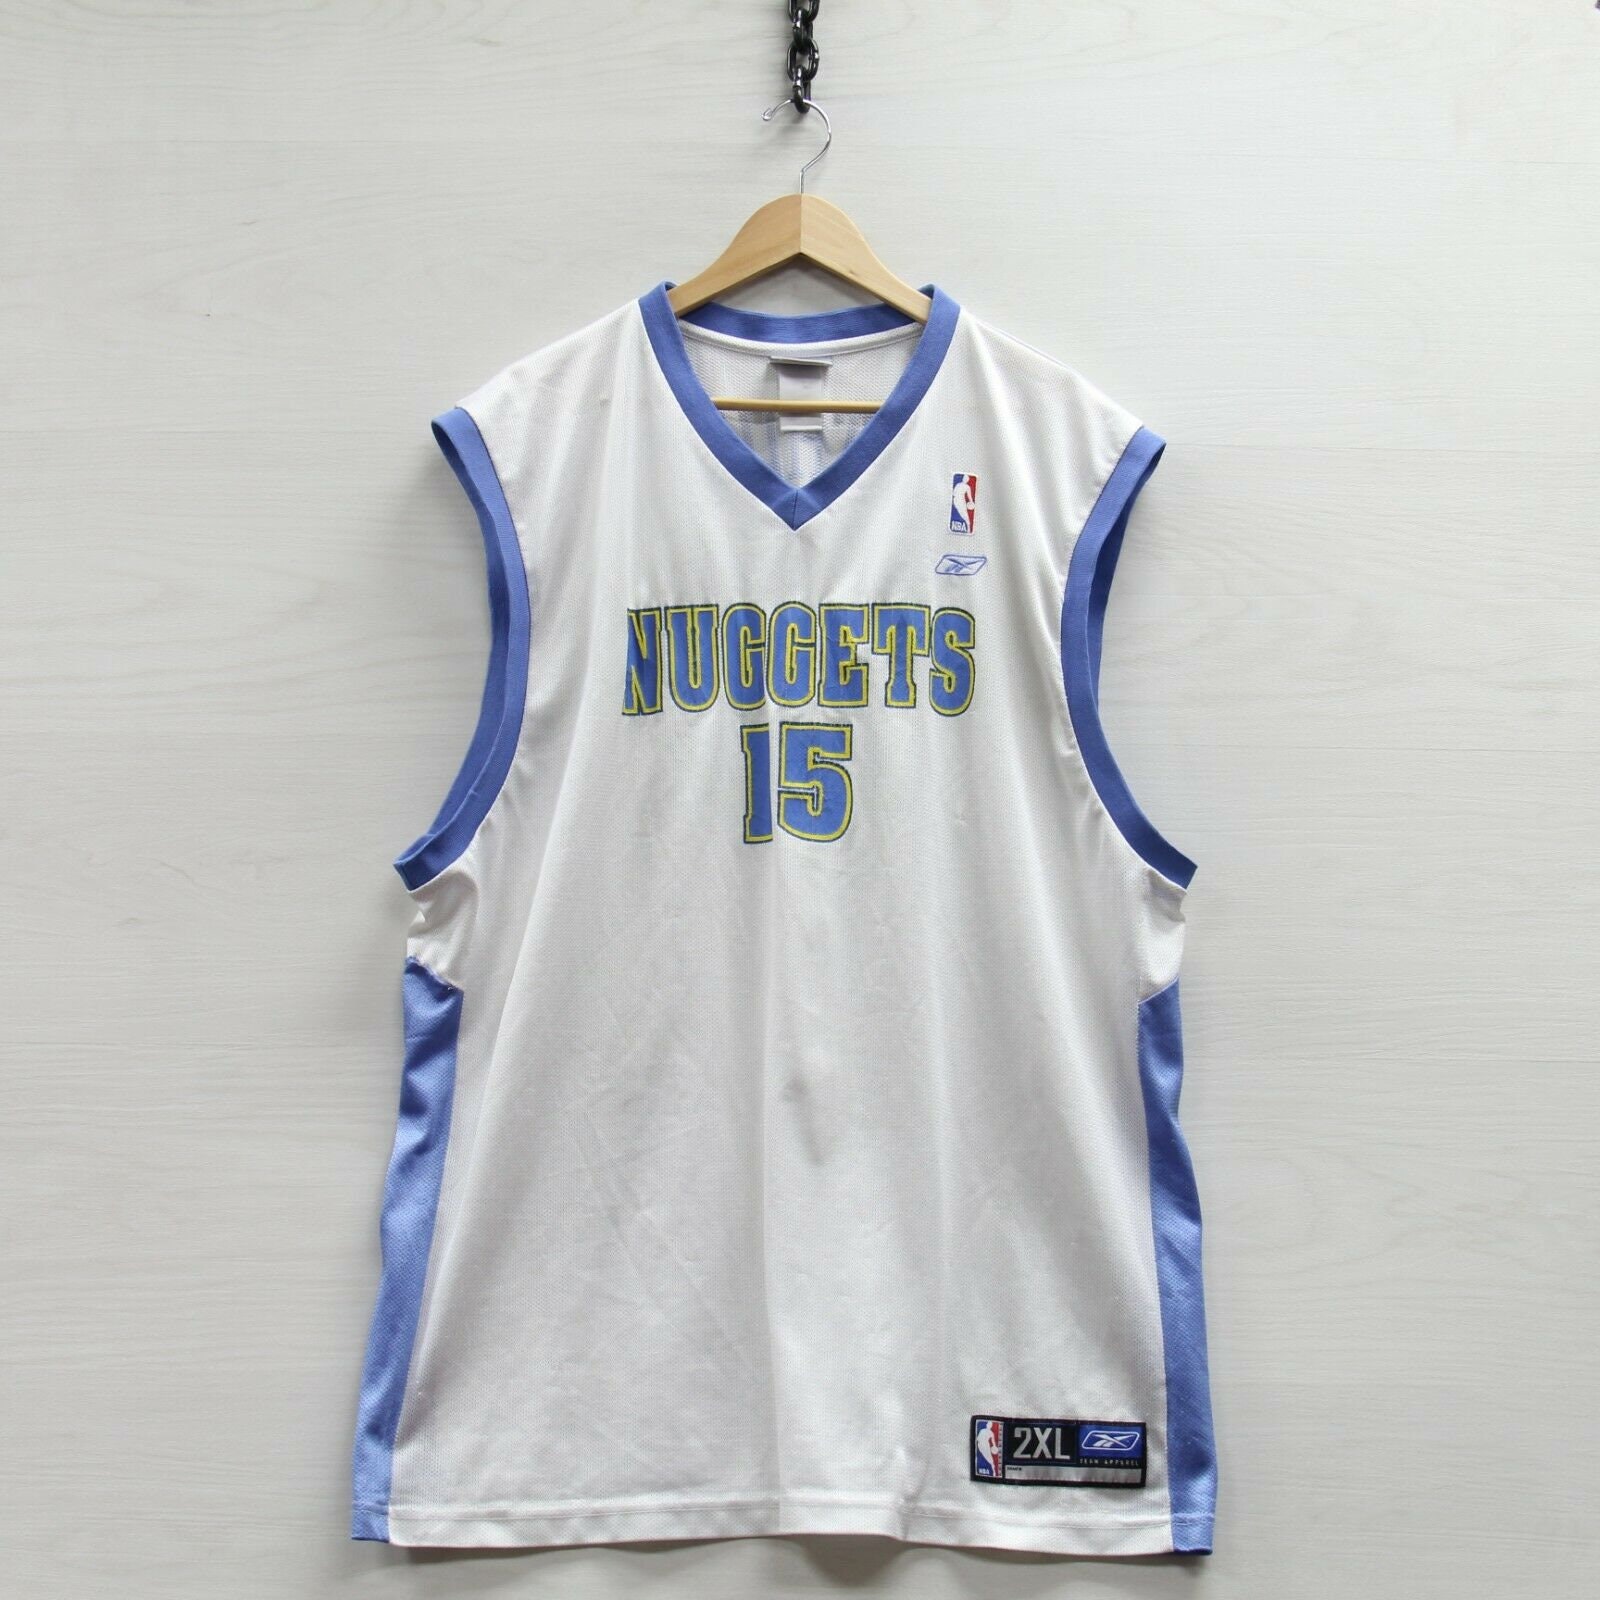 Jimmer Fredette #32 Shanghai Sharks China Authentic Jersey.